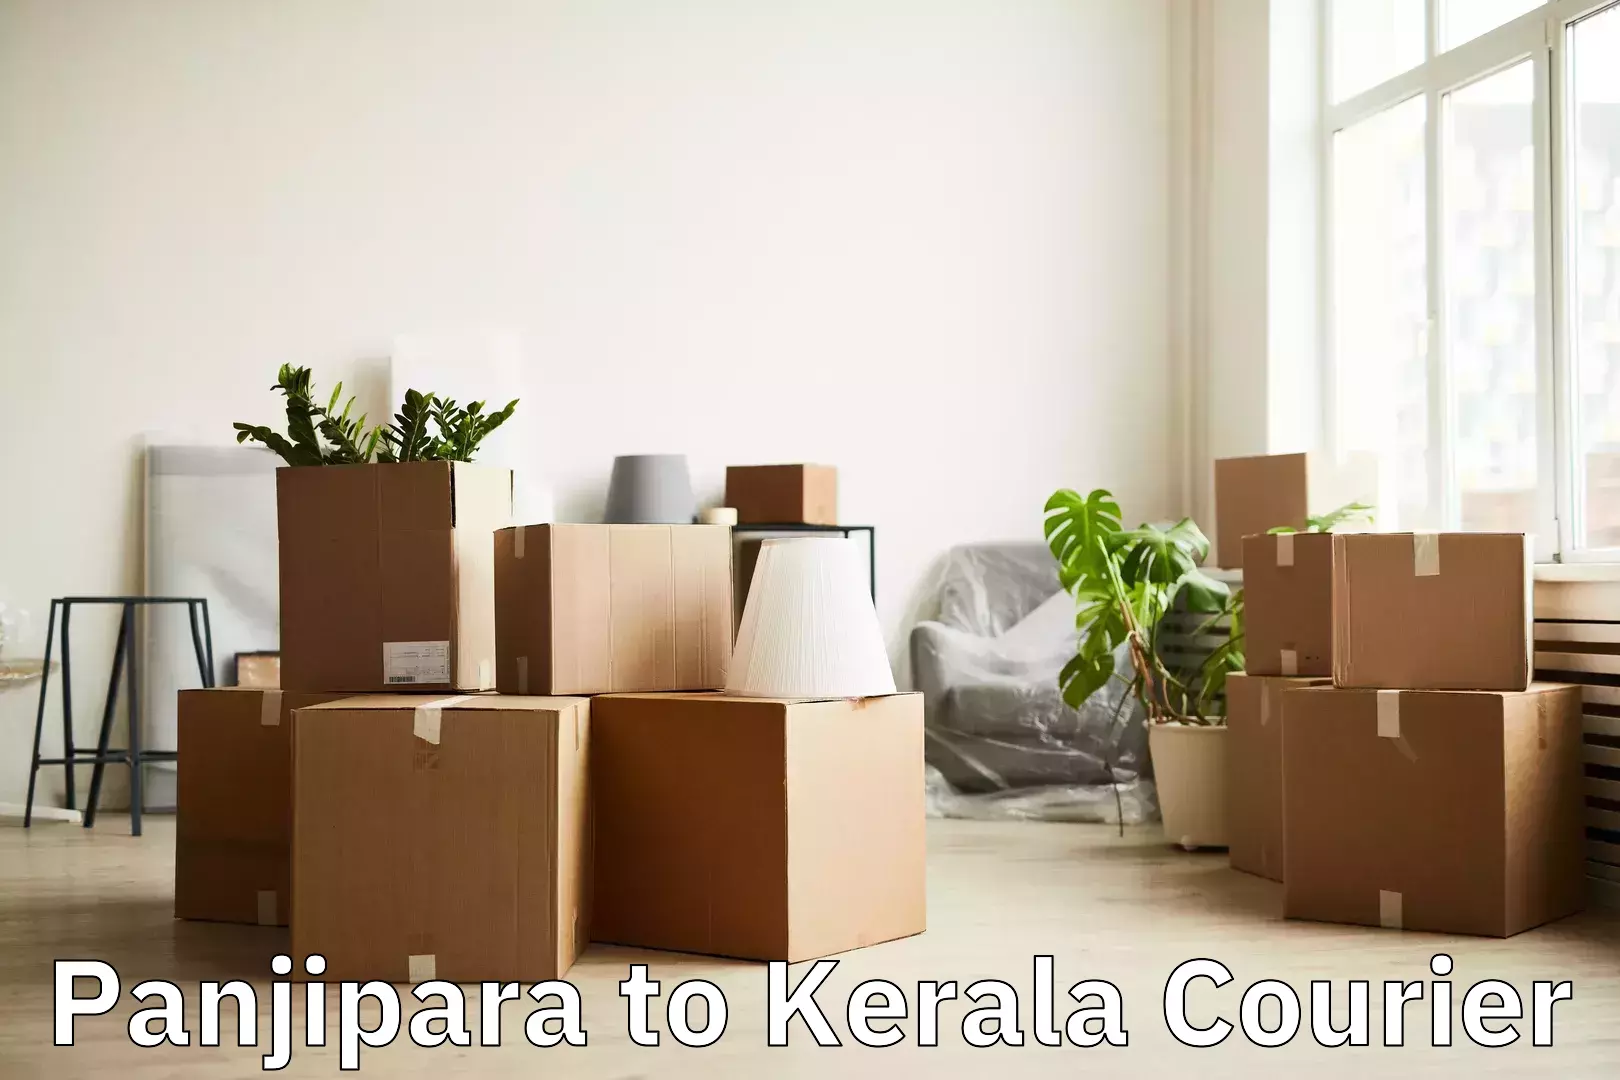 Luggage delivery network Panjipara to Kannur